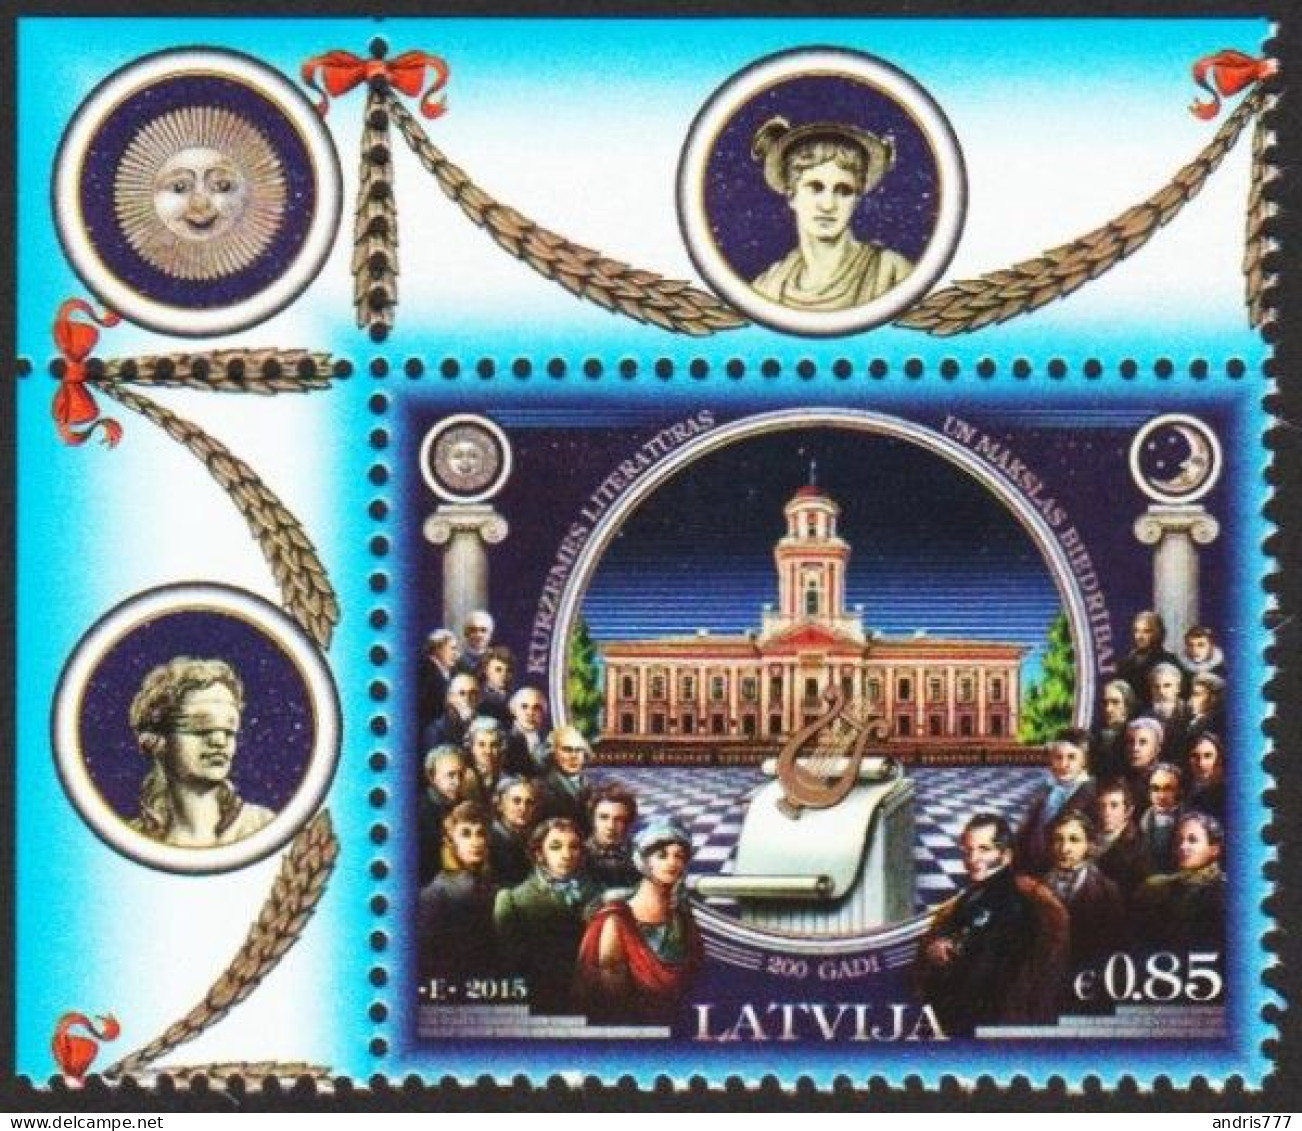 Latvia Lettland Lettonie 2015 (09) Courland Society For Literature And Art - 200 Years (corner) - Letland